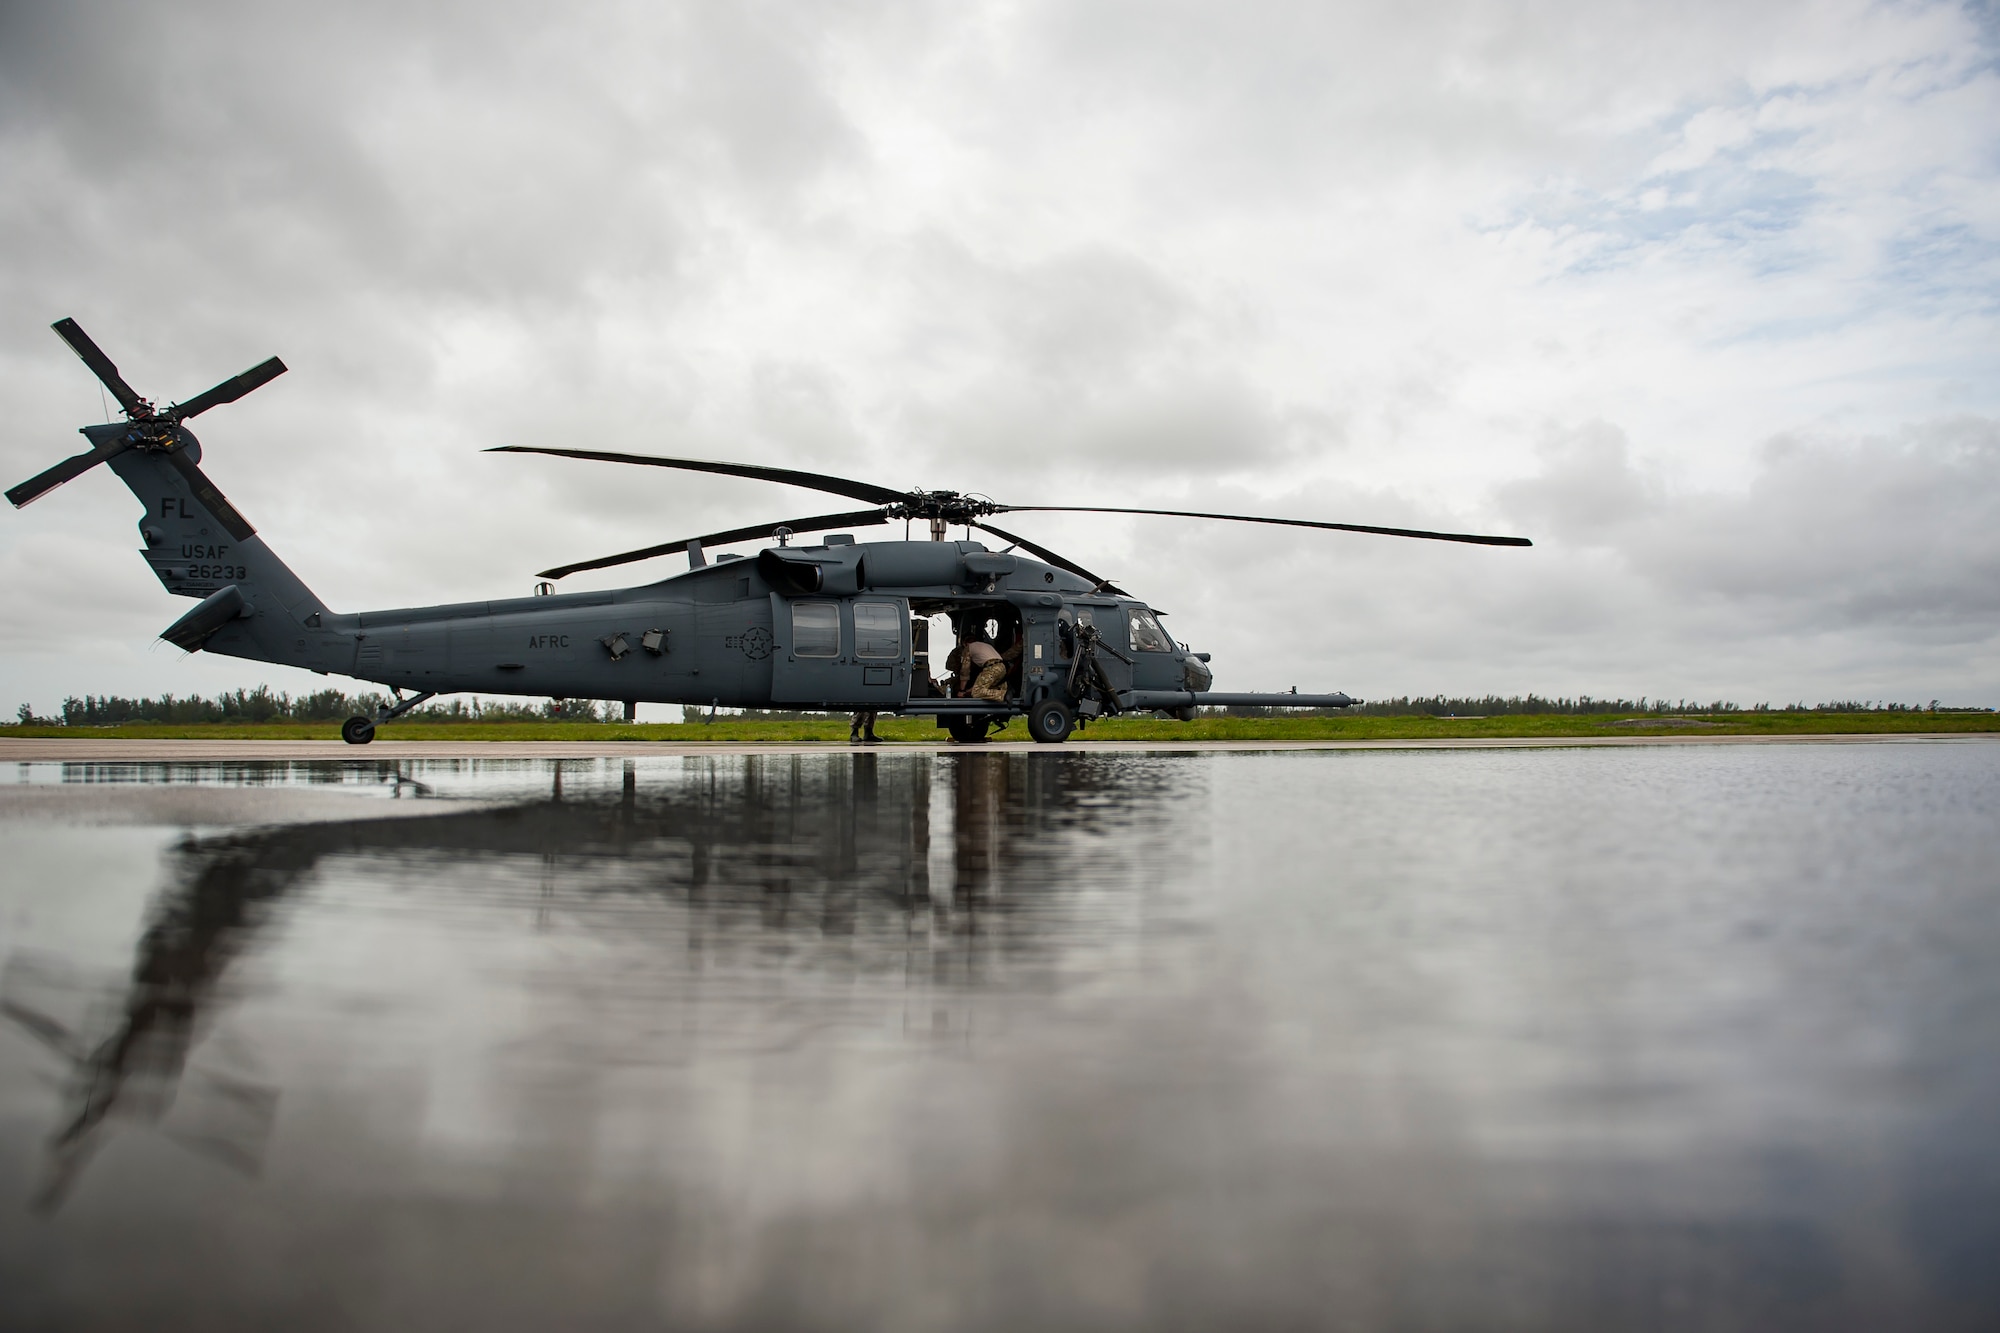 U.S. Air Force assigned to the the 920th Rescue Wing, Air Force Reserve, out of Patrick Air Force Base in Cocoa Beach, Florida, prepare an HH-60G Pave Hawk helicopter for flight May 27, 2018 during the 2nd annual Salute to American Heroes Air and Sea Show in Miami. This two-day event showcases military fighter jets and other aircraft and equipment from all branches of the United States military in observance of Memorial Day, honoring servicemembers who have made the ultimate sacrifice. (U.S. Air Force photo by Staff Sgt. Jared Trimarchi)